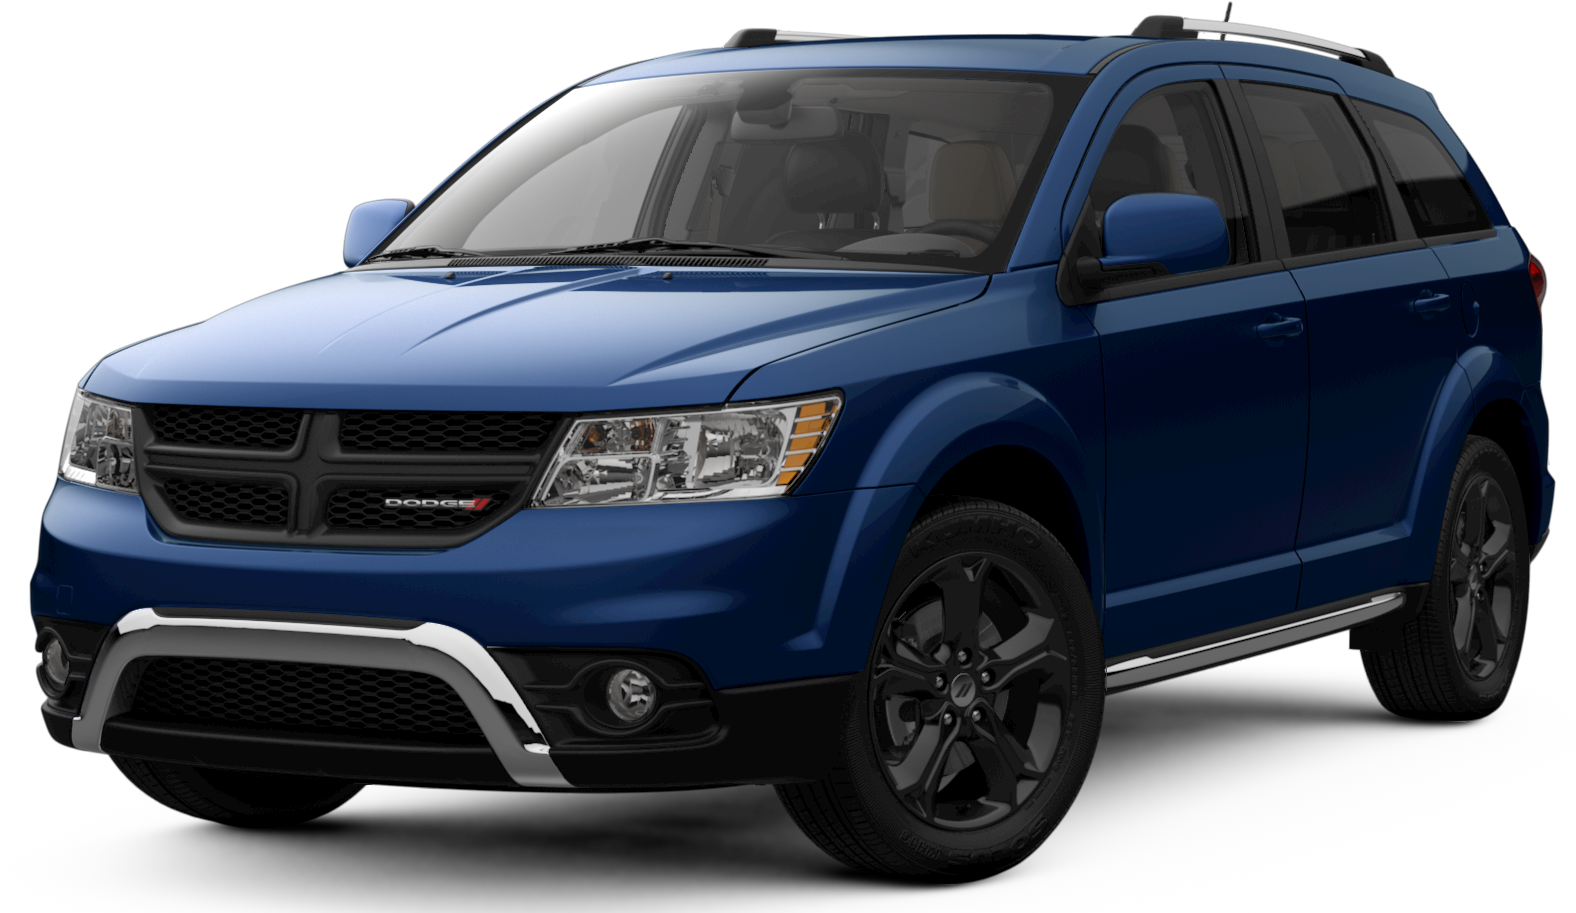 2018 Dodge Journey Incentives, Specials & Offers in Philadelphia PA